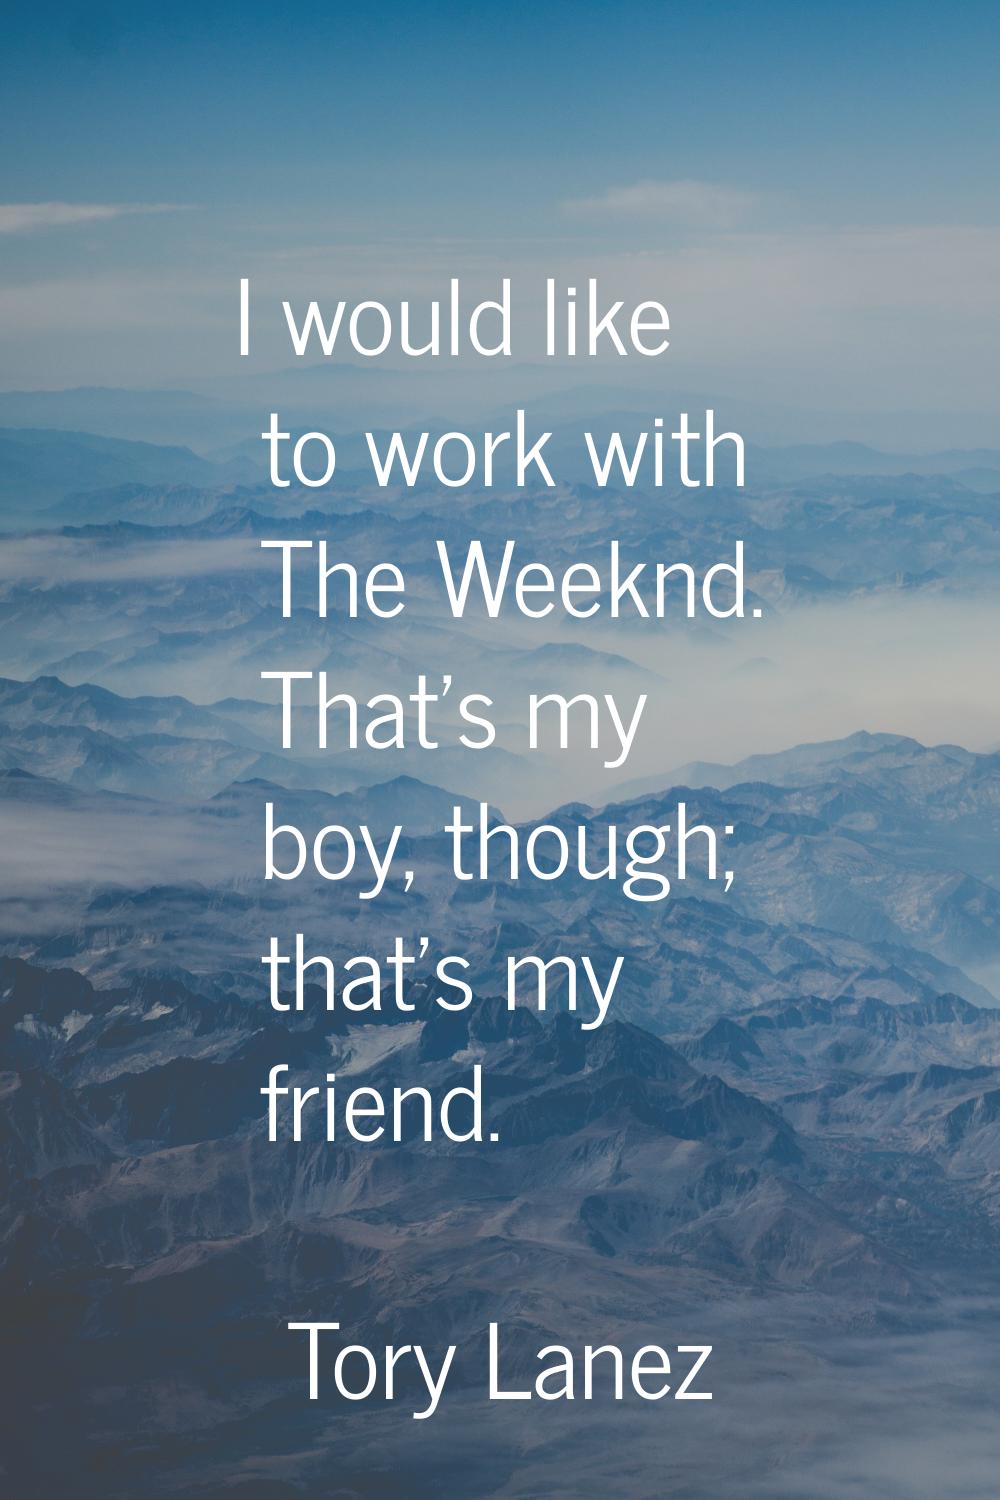 I would like to work with The Weeknd. That's my boy, though; that's my friend.